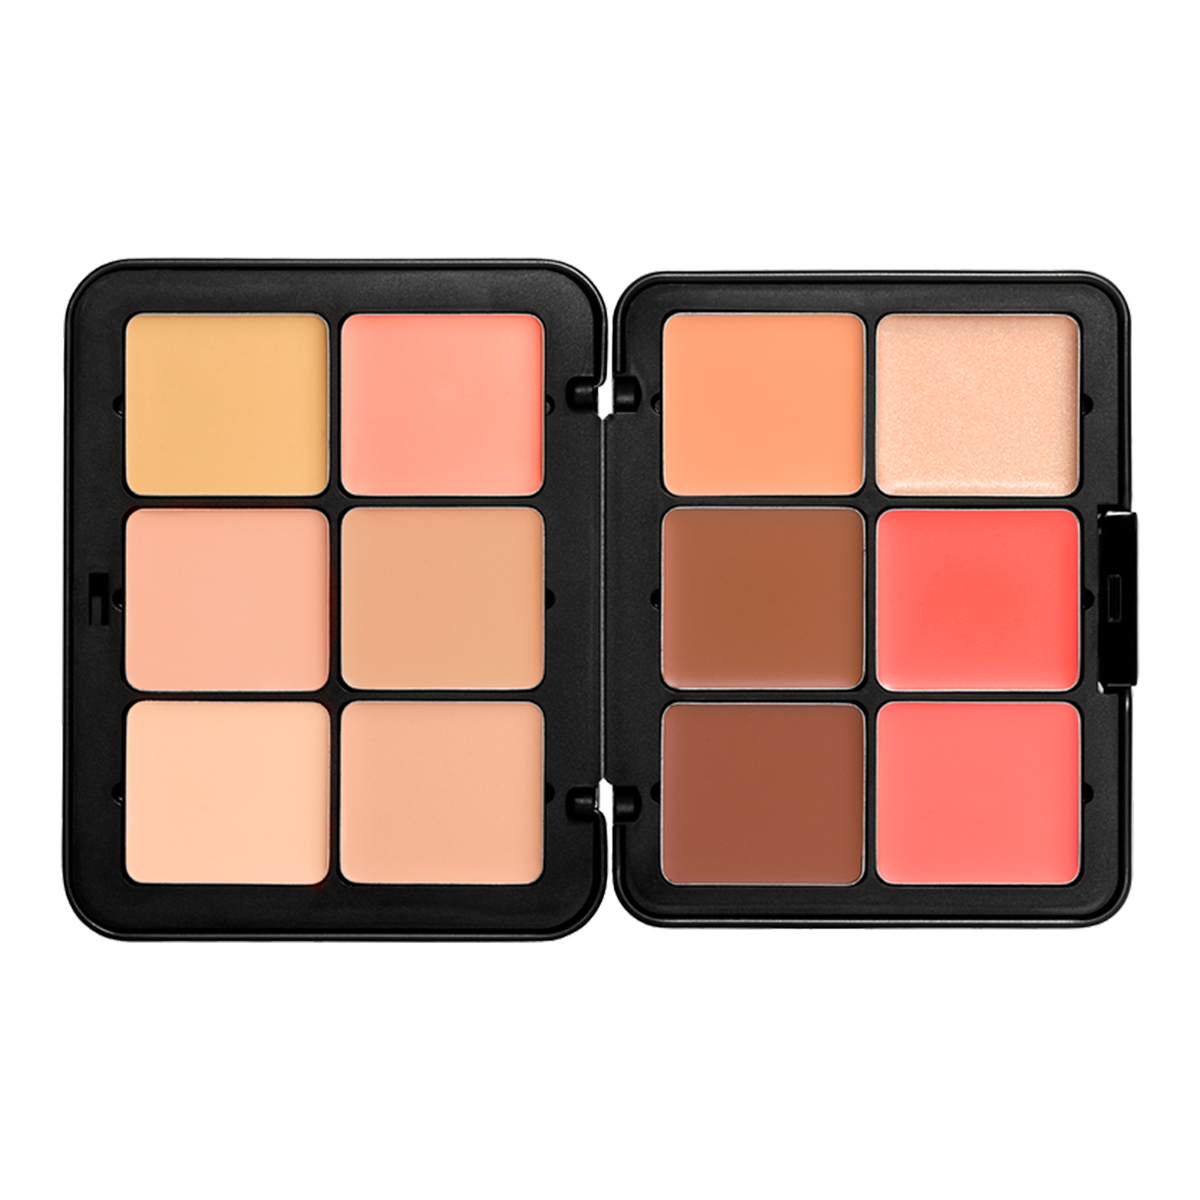 Skin All-in-one Face Palette - Harmony 1